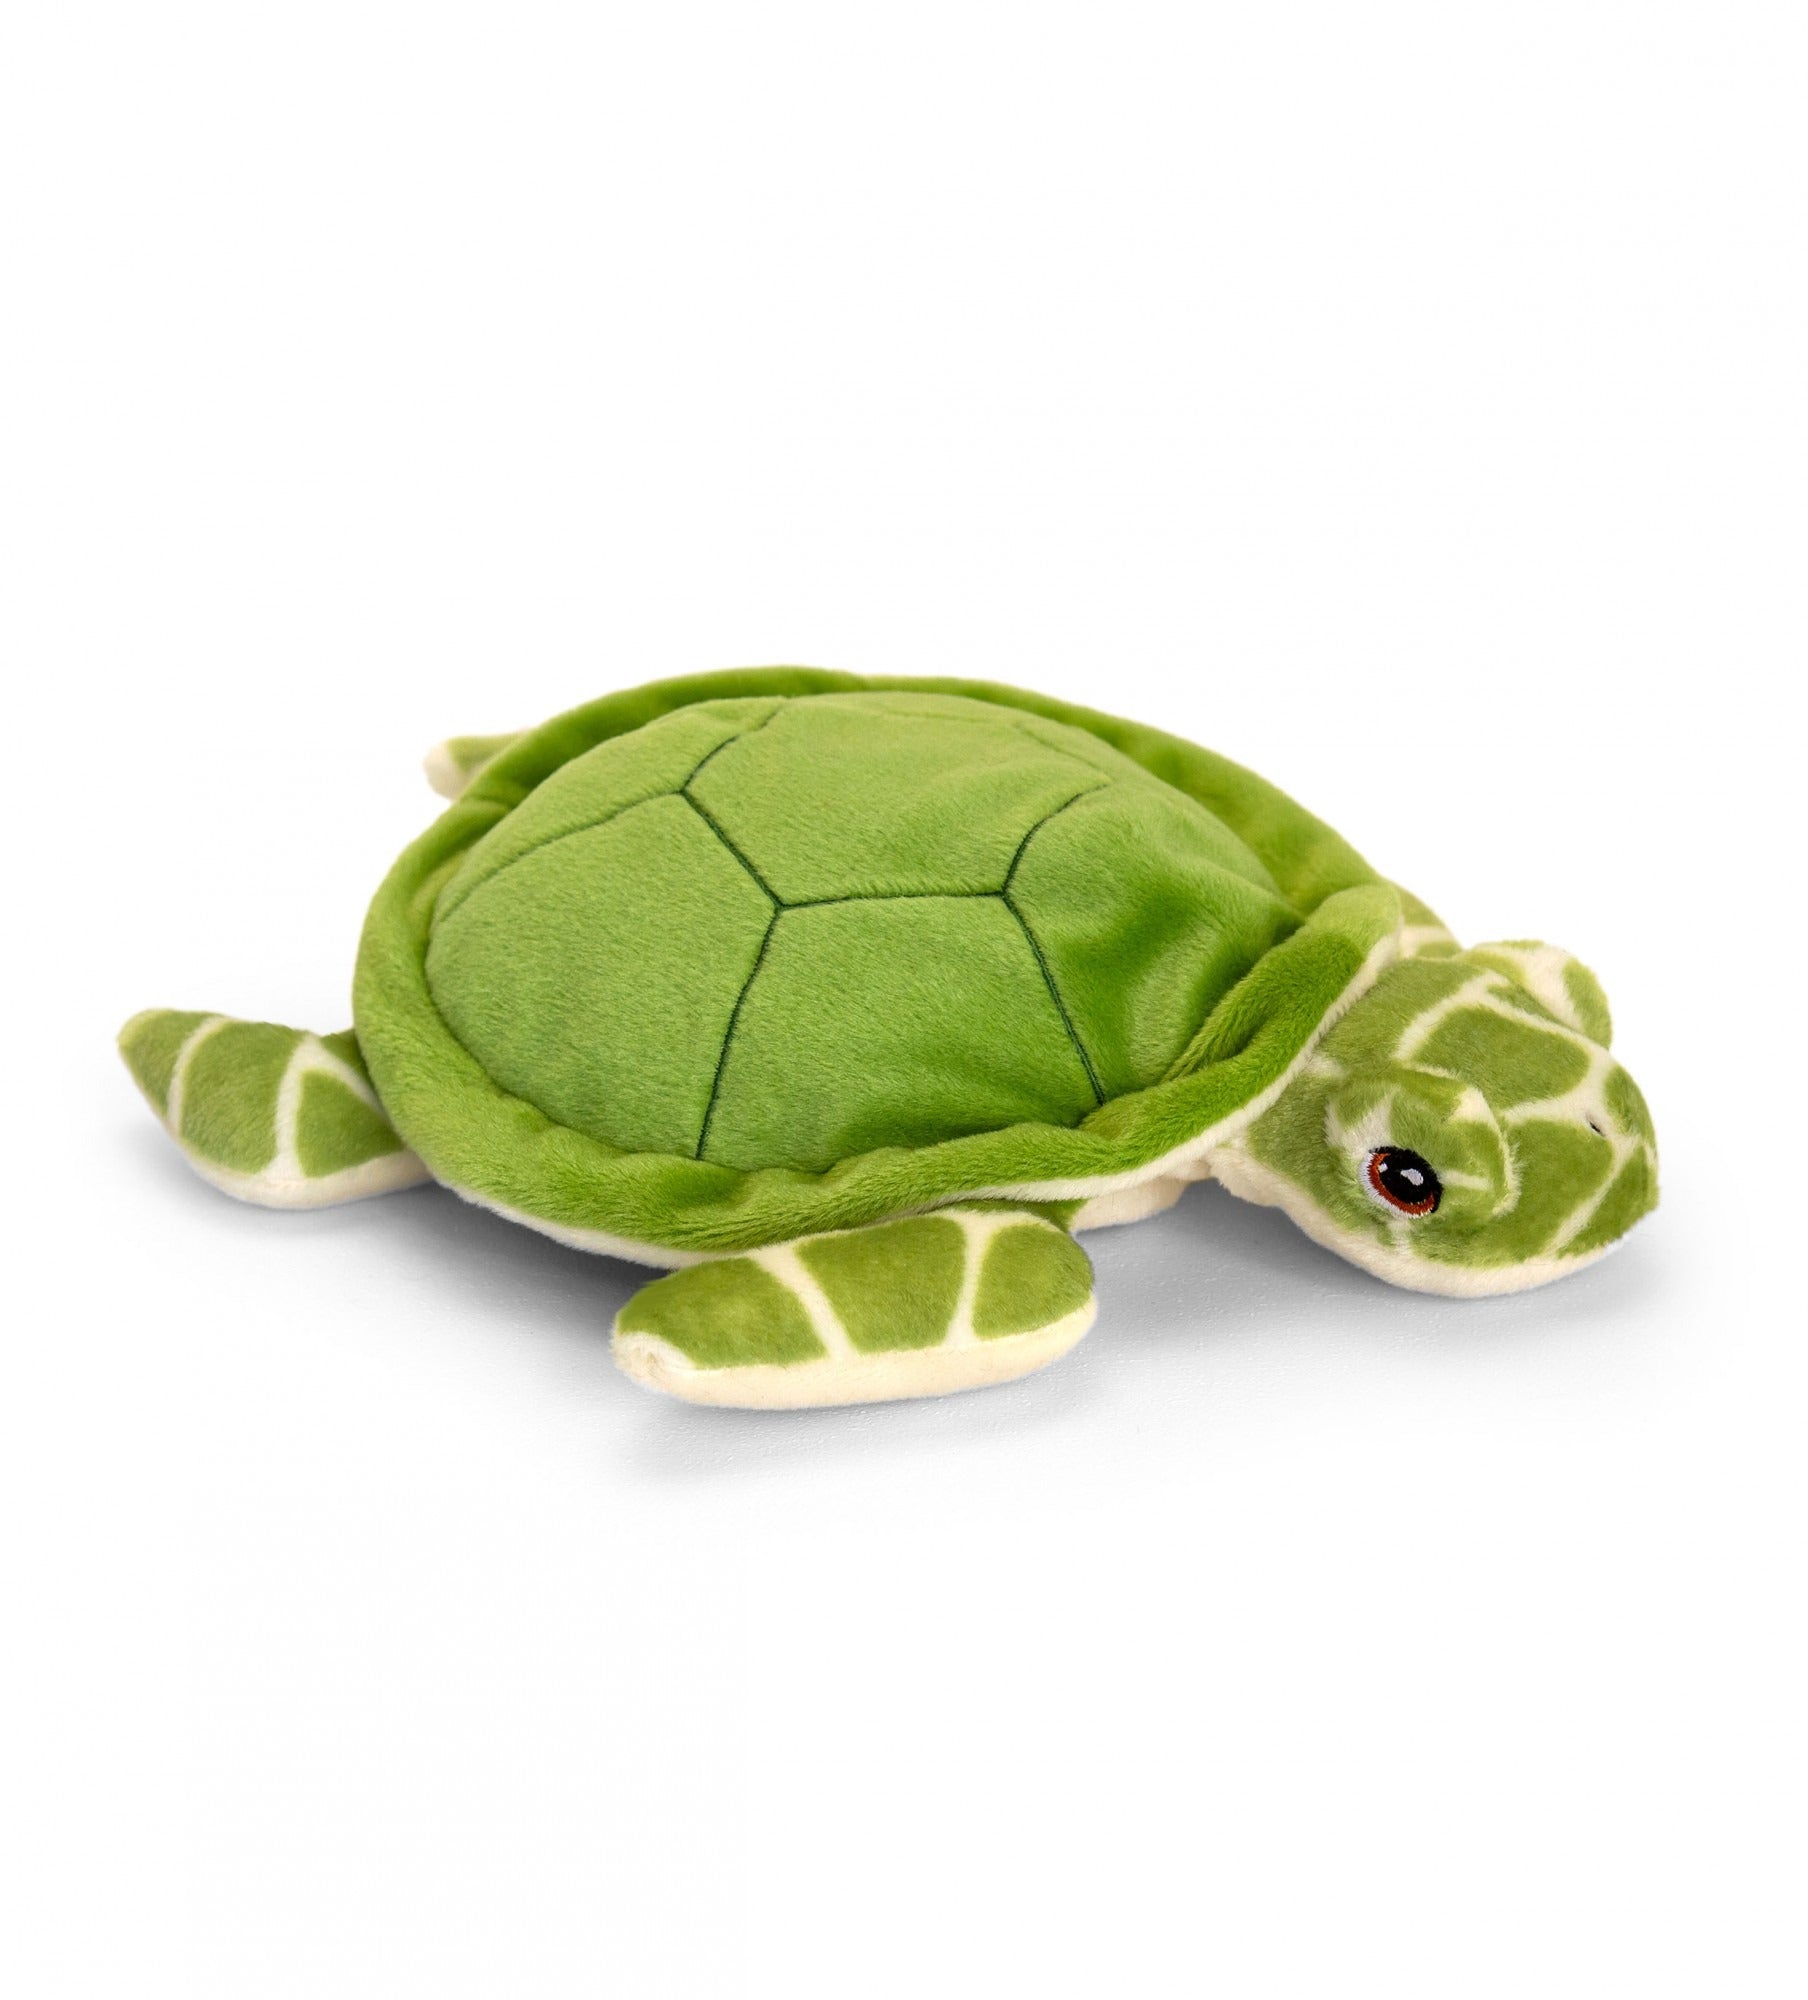 View Keeleco Turtle 25cm information